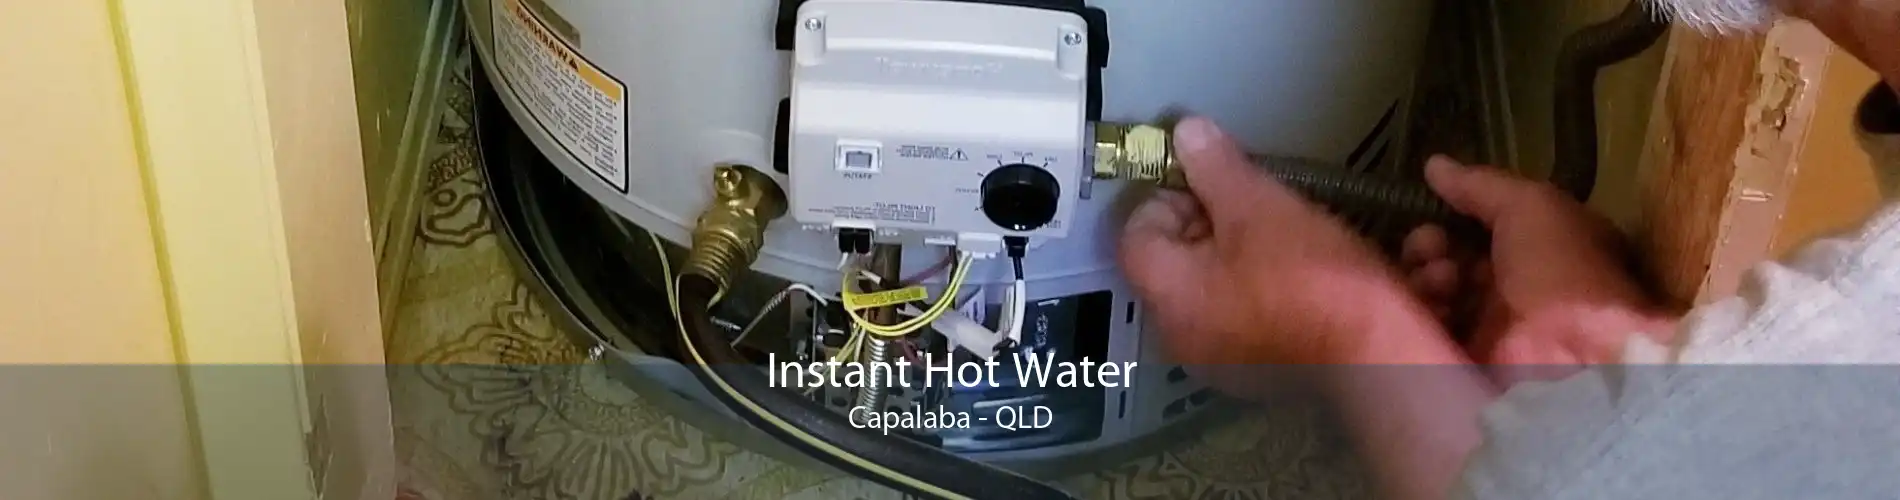 Instant Hot Water Capalaba - QLD